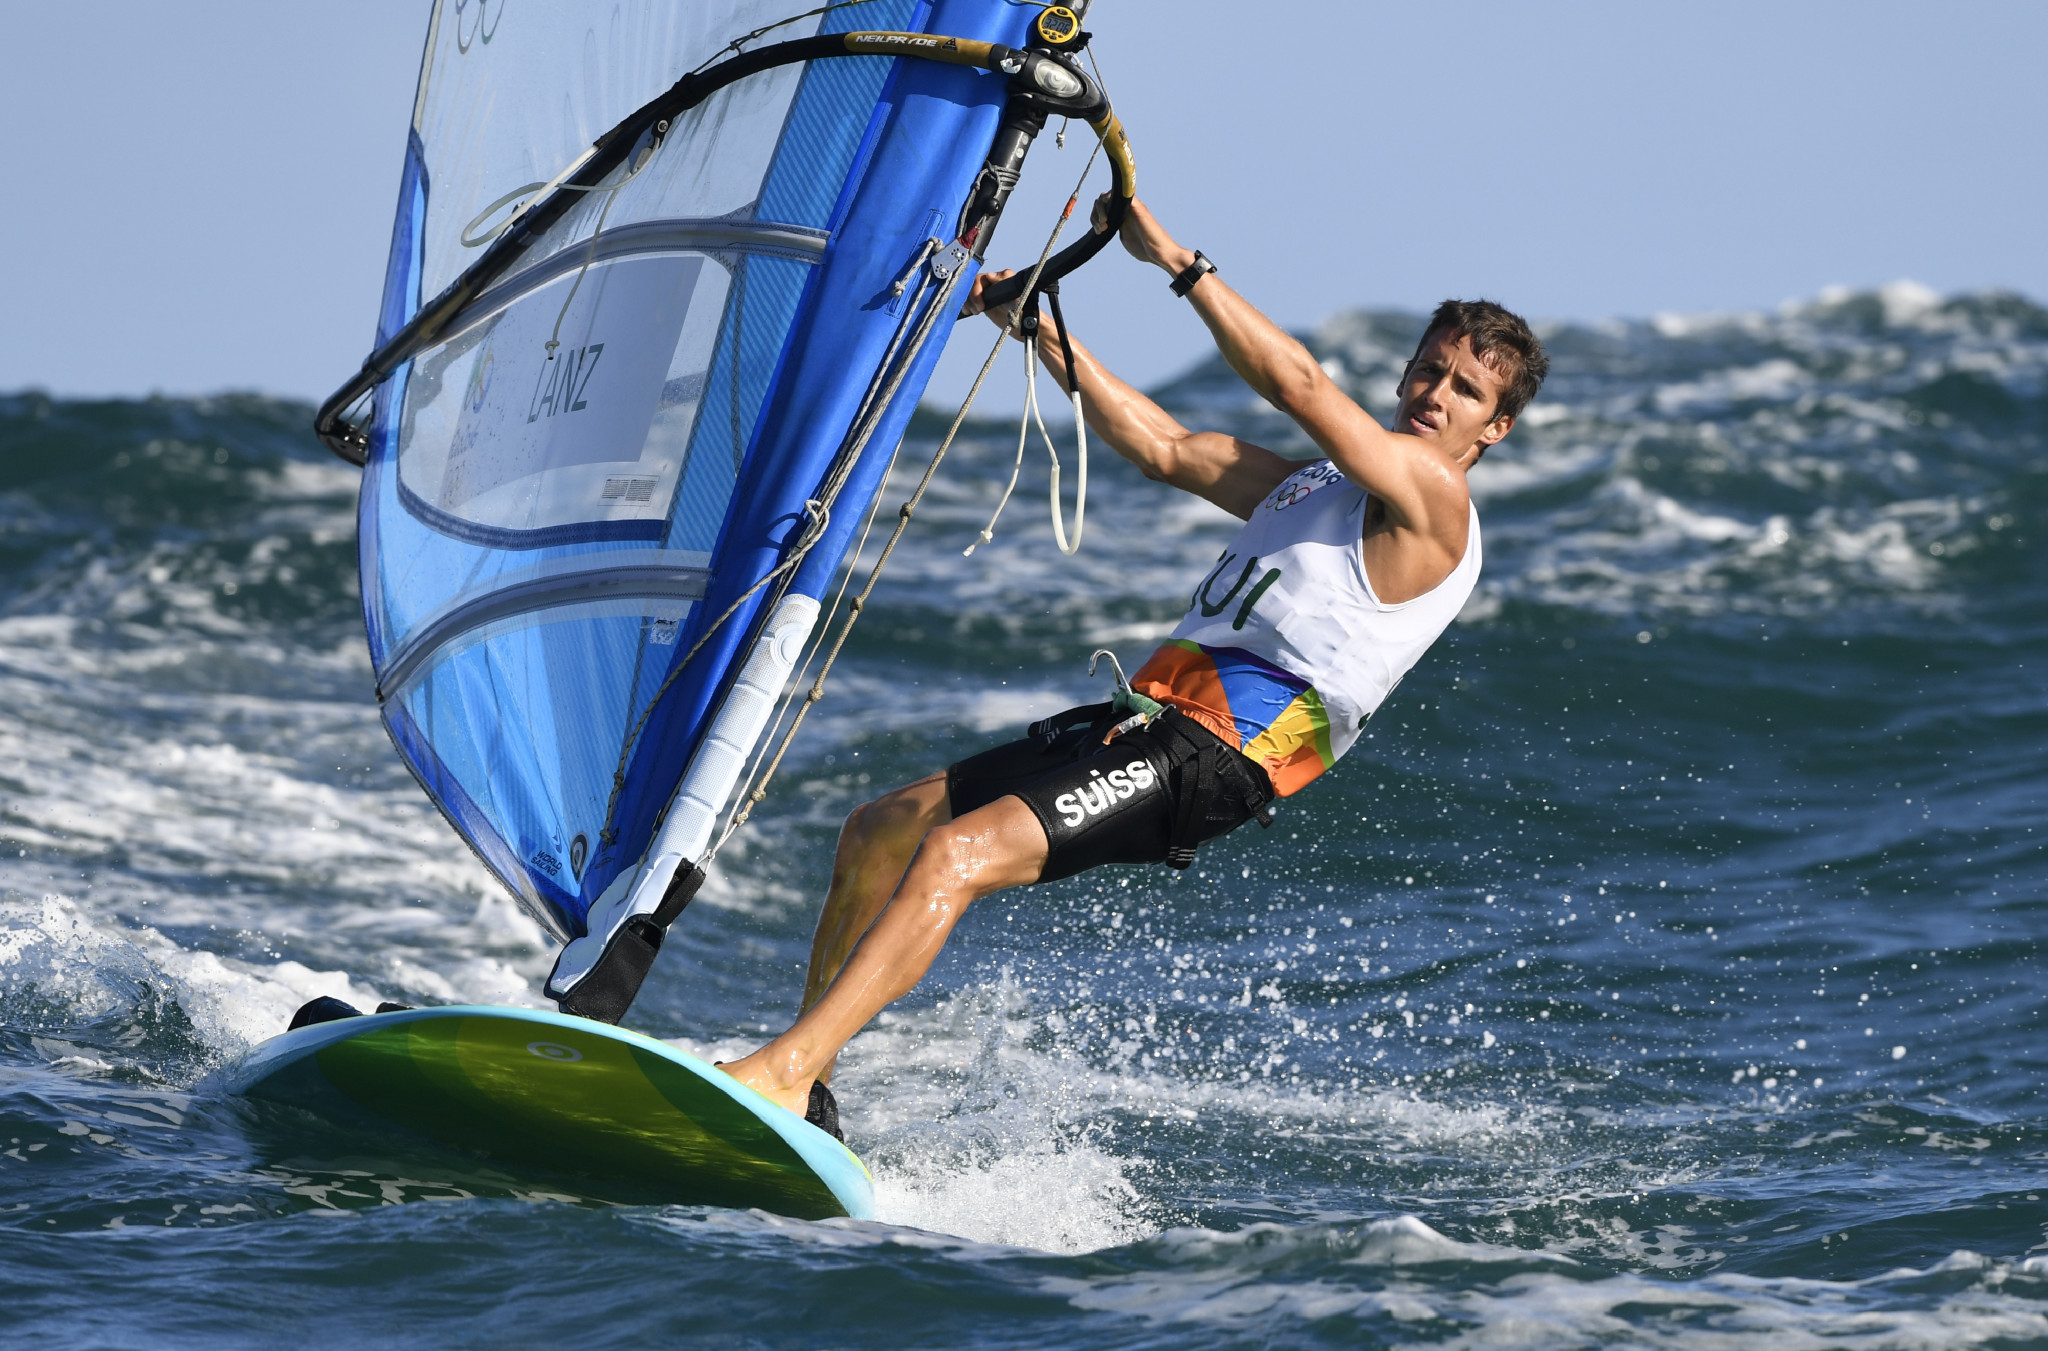 Mateo Sanz Lanz is due to be Switzerland's representative in windsurfing ©Getty Images